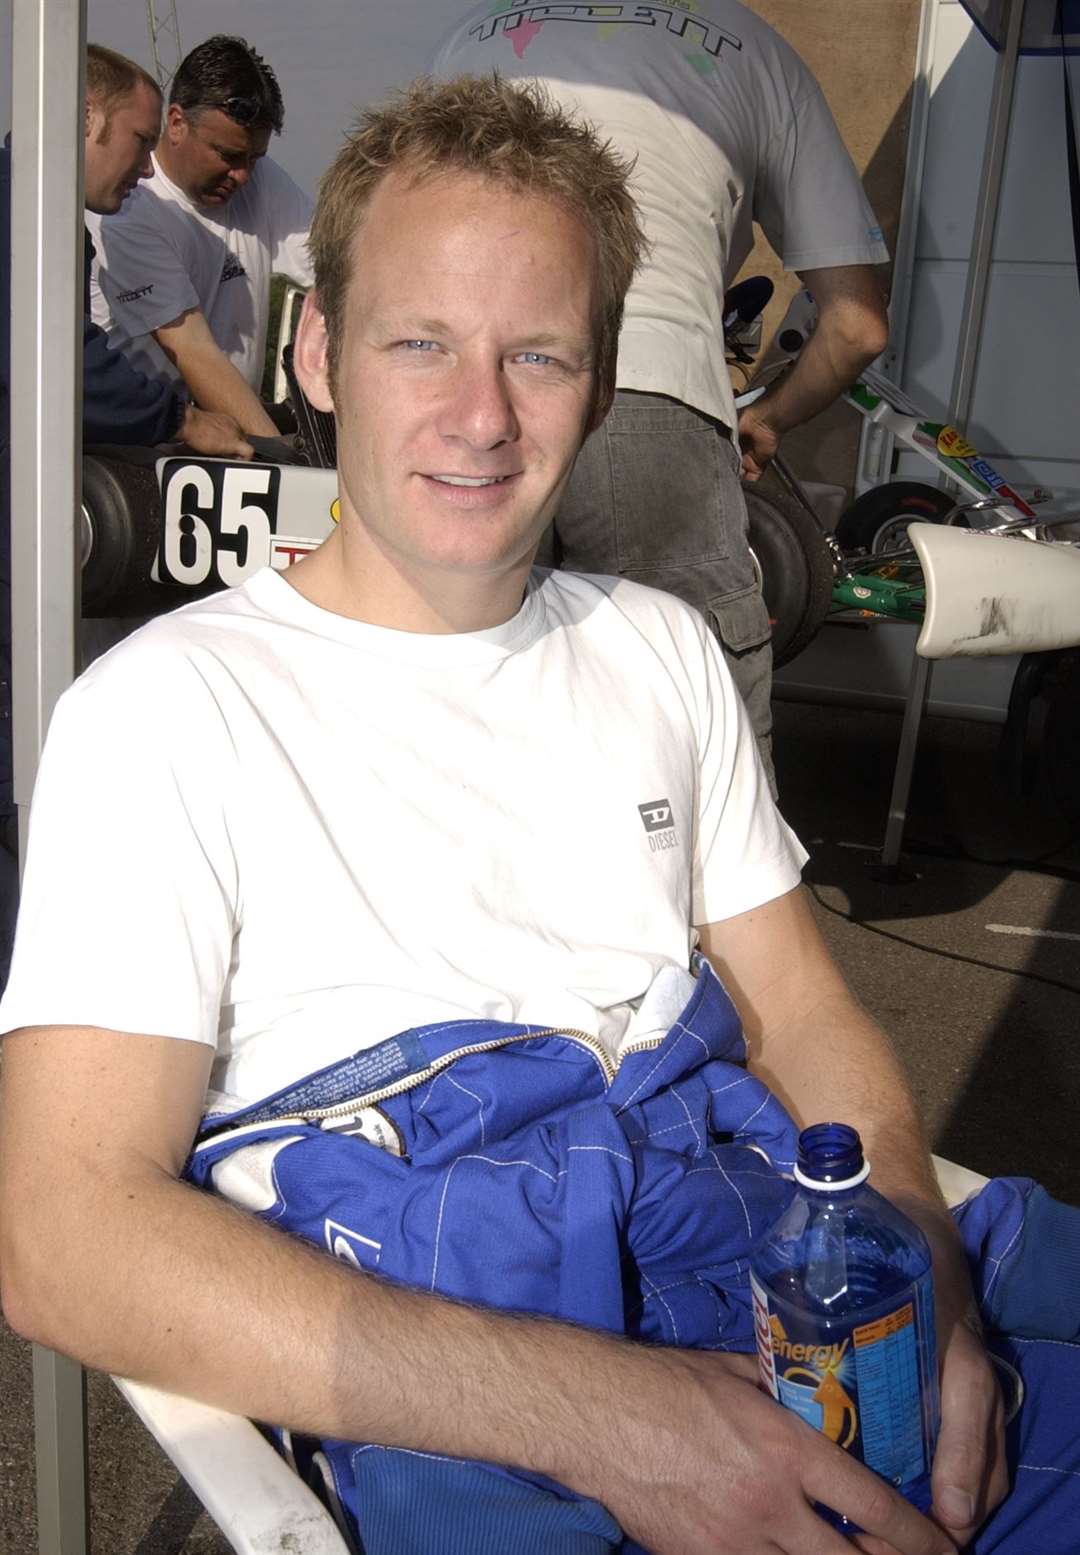 Six-time British Superbike champion Shane 'Shakey' Byrne raced as a novice in the Rotax Max class during Buckmore's 40th anniversary meeting in September 2003